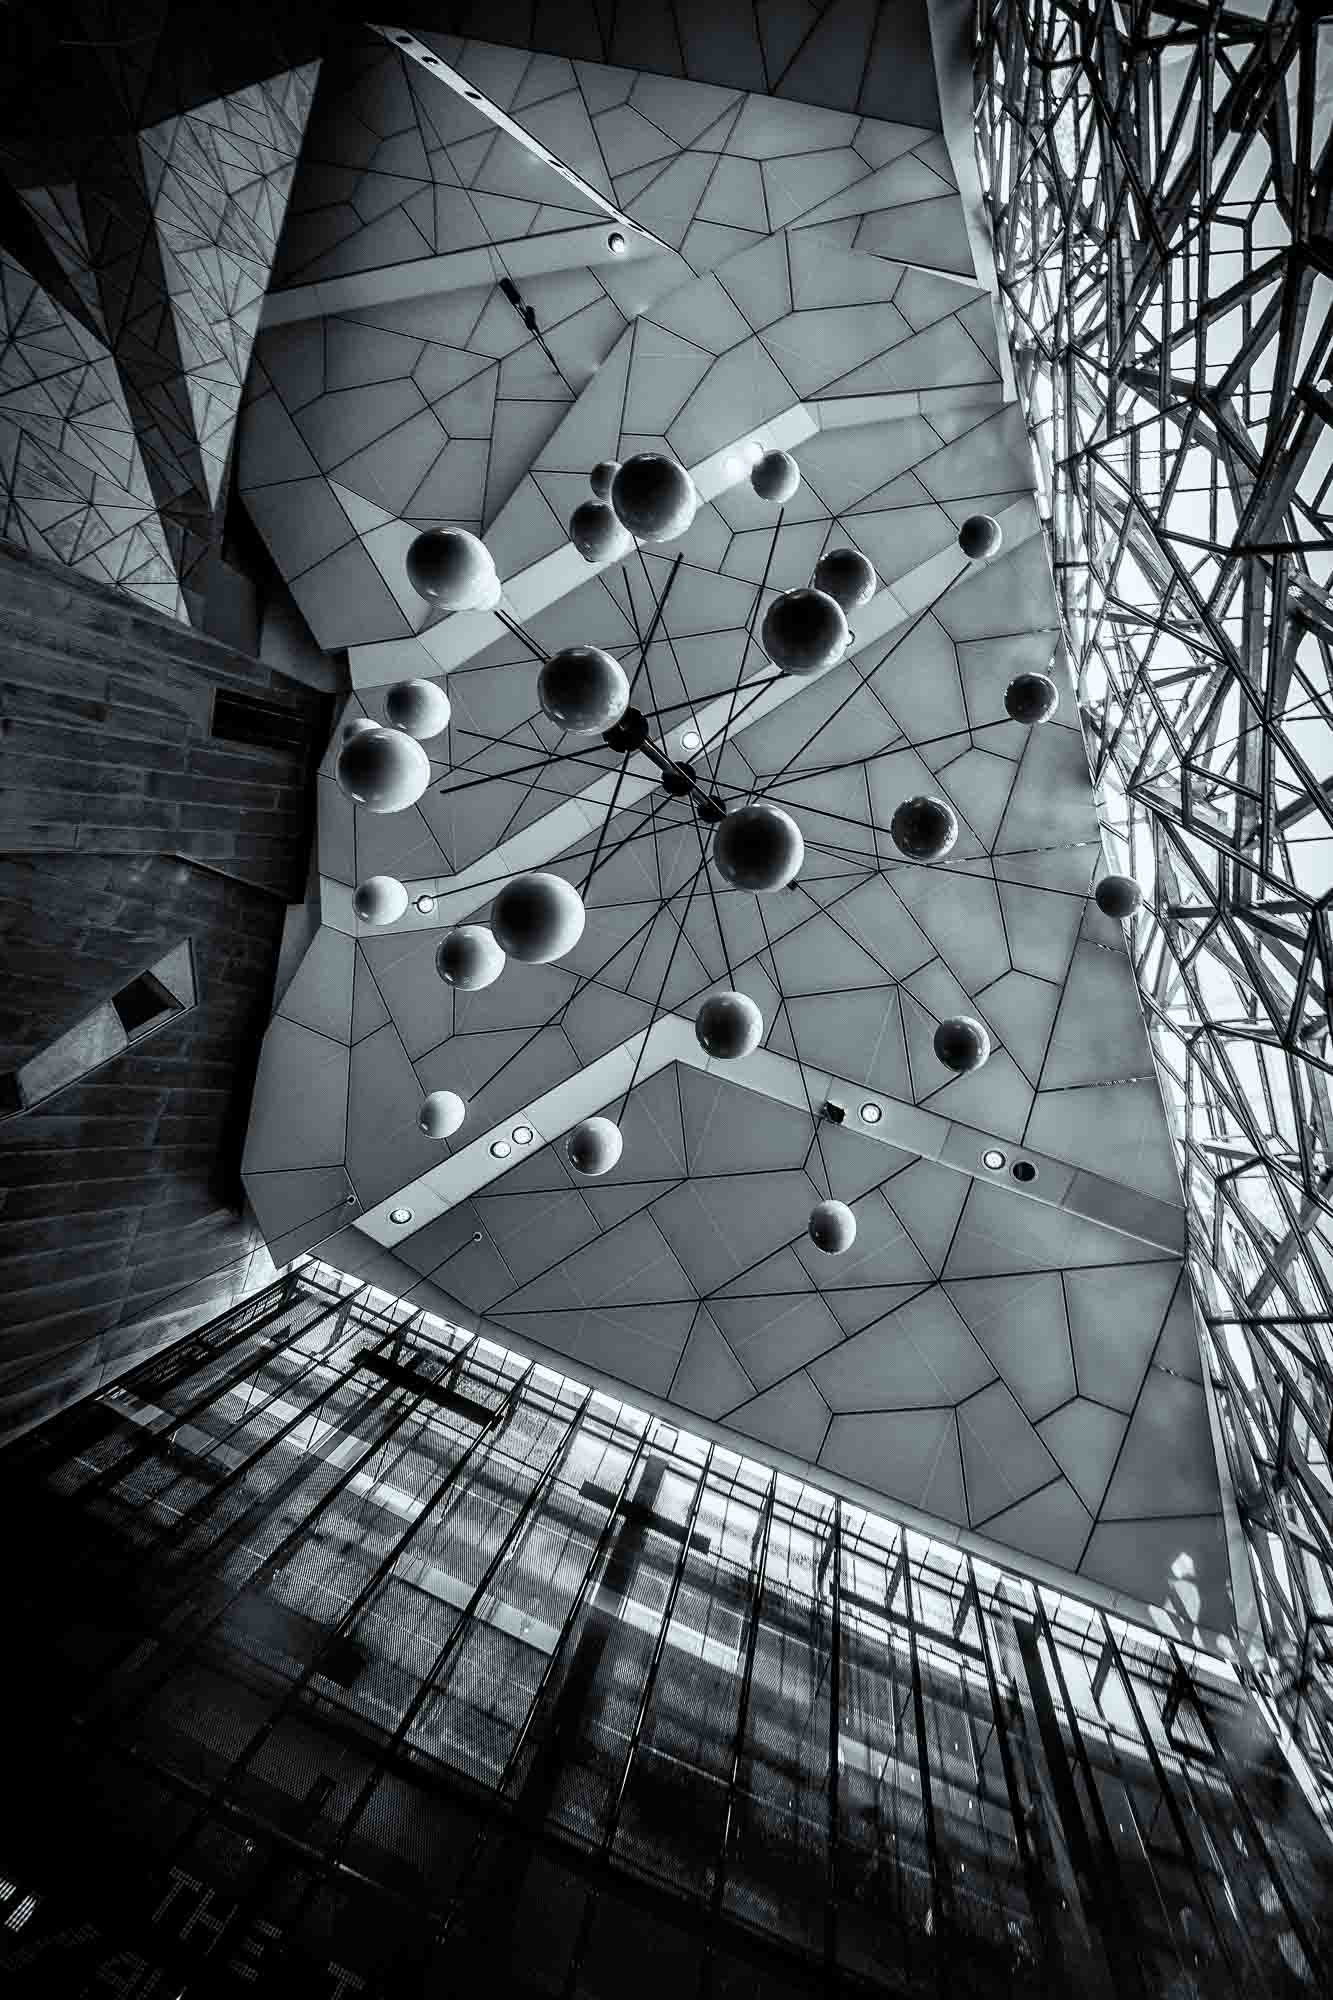 Black and white photo of the abstract geometric ceiling at Federation Square in Melbourne, with spherical elements hanging against the angular design.